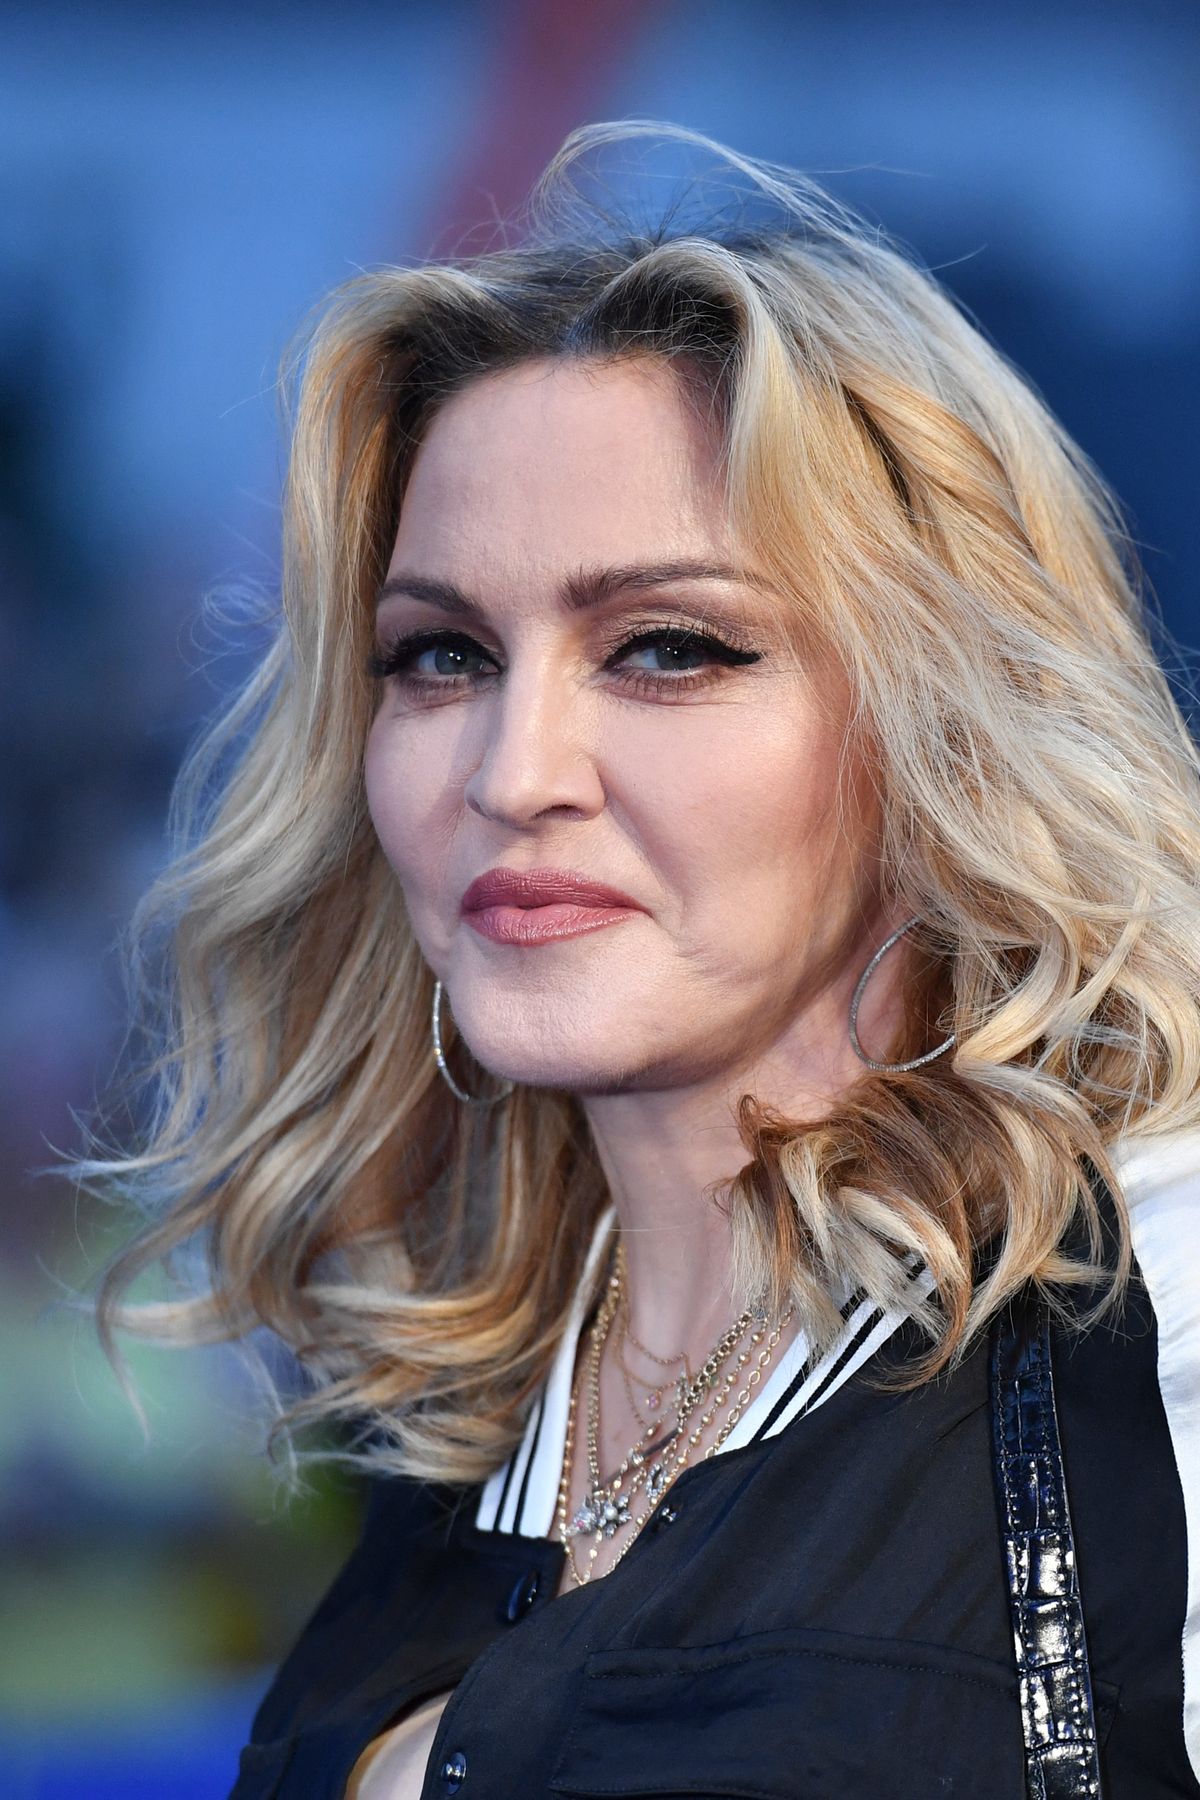 US singer-songwriter Madonna poses arriving on the carpet to attend a special screening of the film "The Beatles Eight Days A Week: The Touring Years" in London on September 15, 2016. (Photo by Ben STANSALL / AFP)